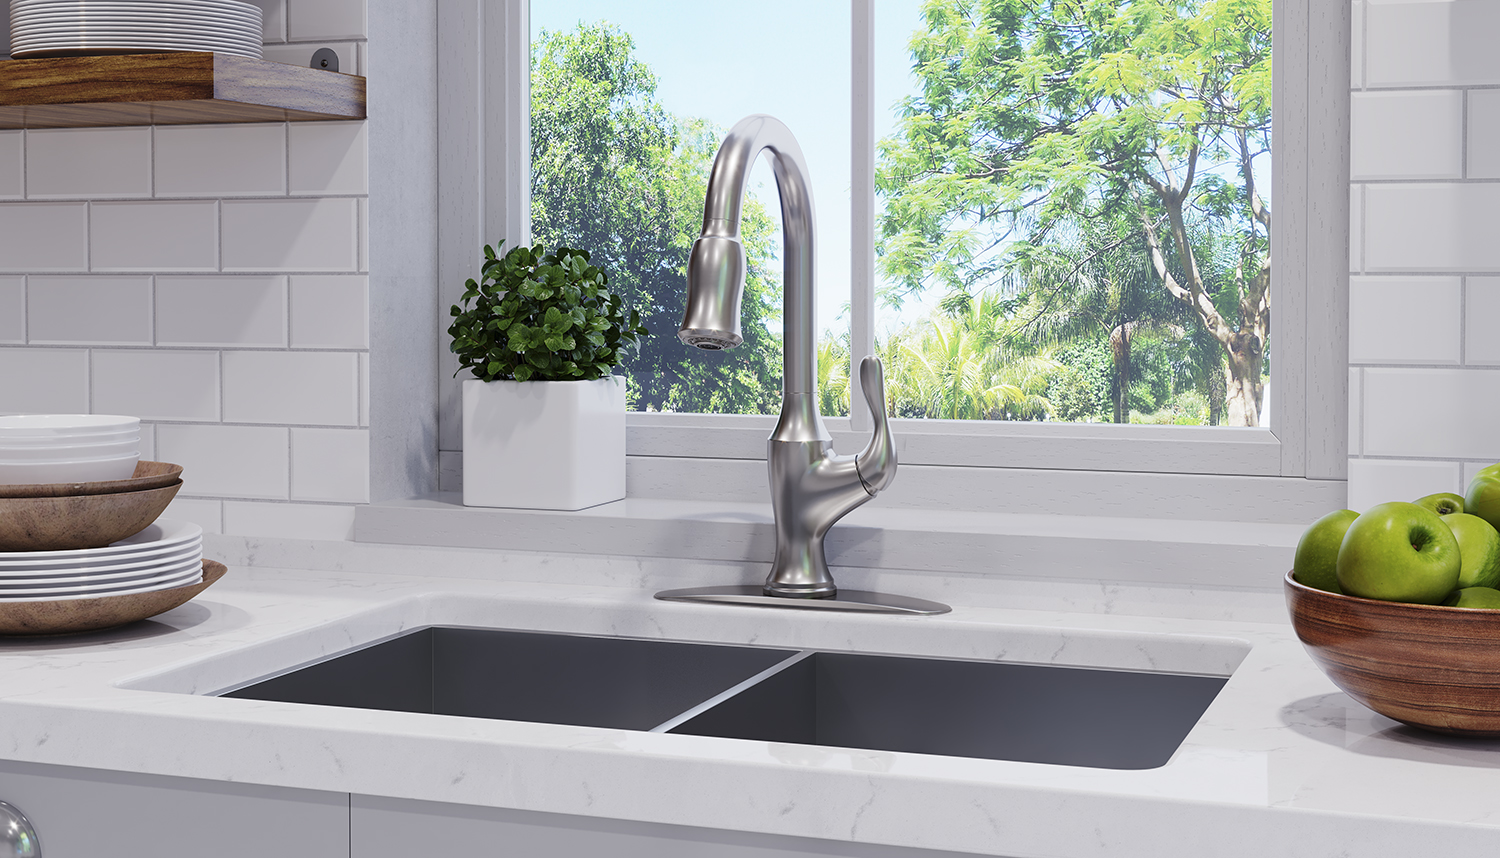 Deming Pull-Down Kitchen Faucet by Pfister wins 2018 ADEX Awards.